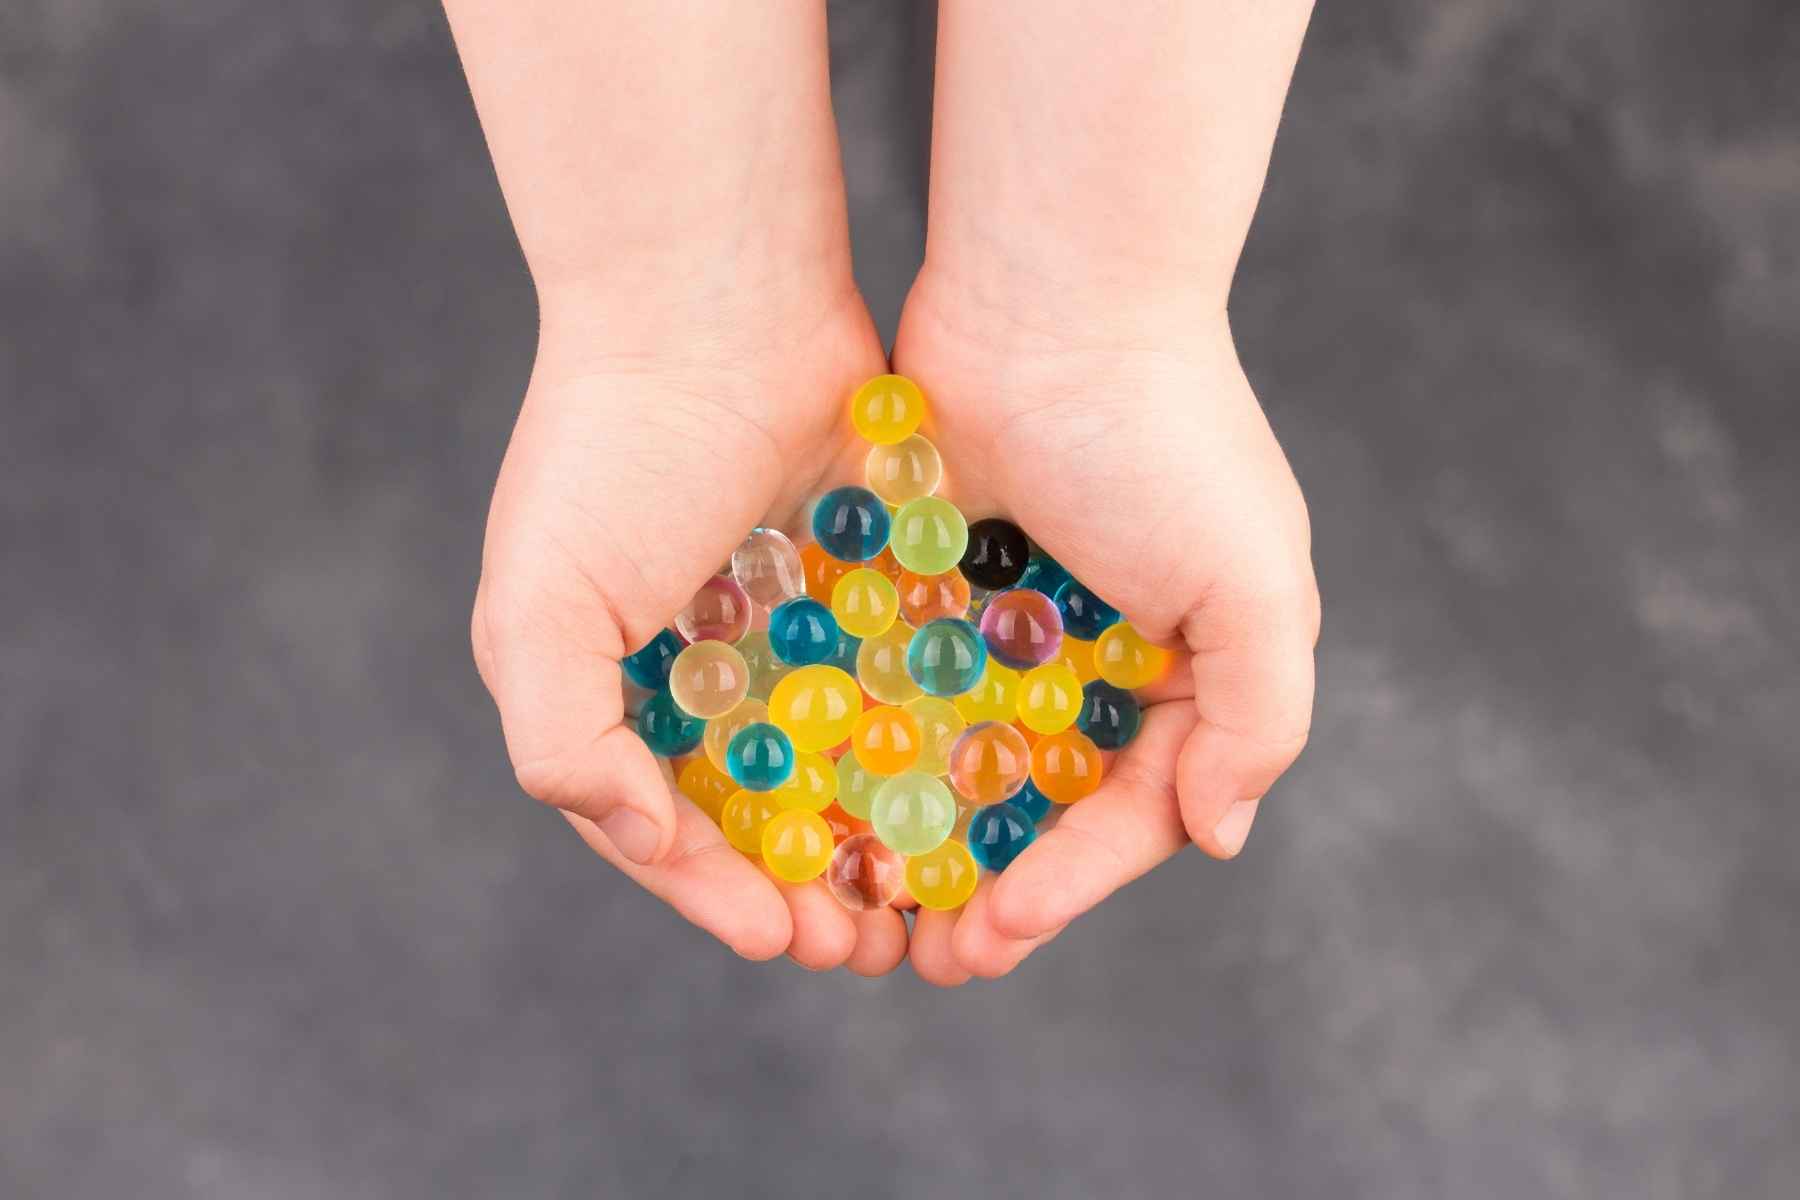 Kid holding orbeez in many colors in his hands